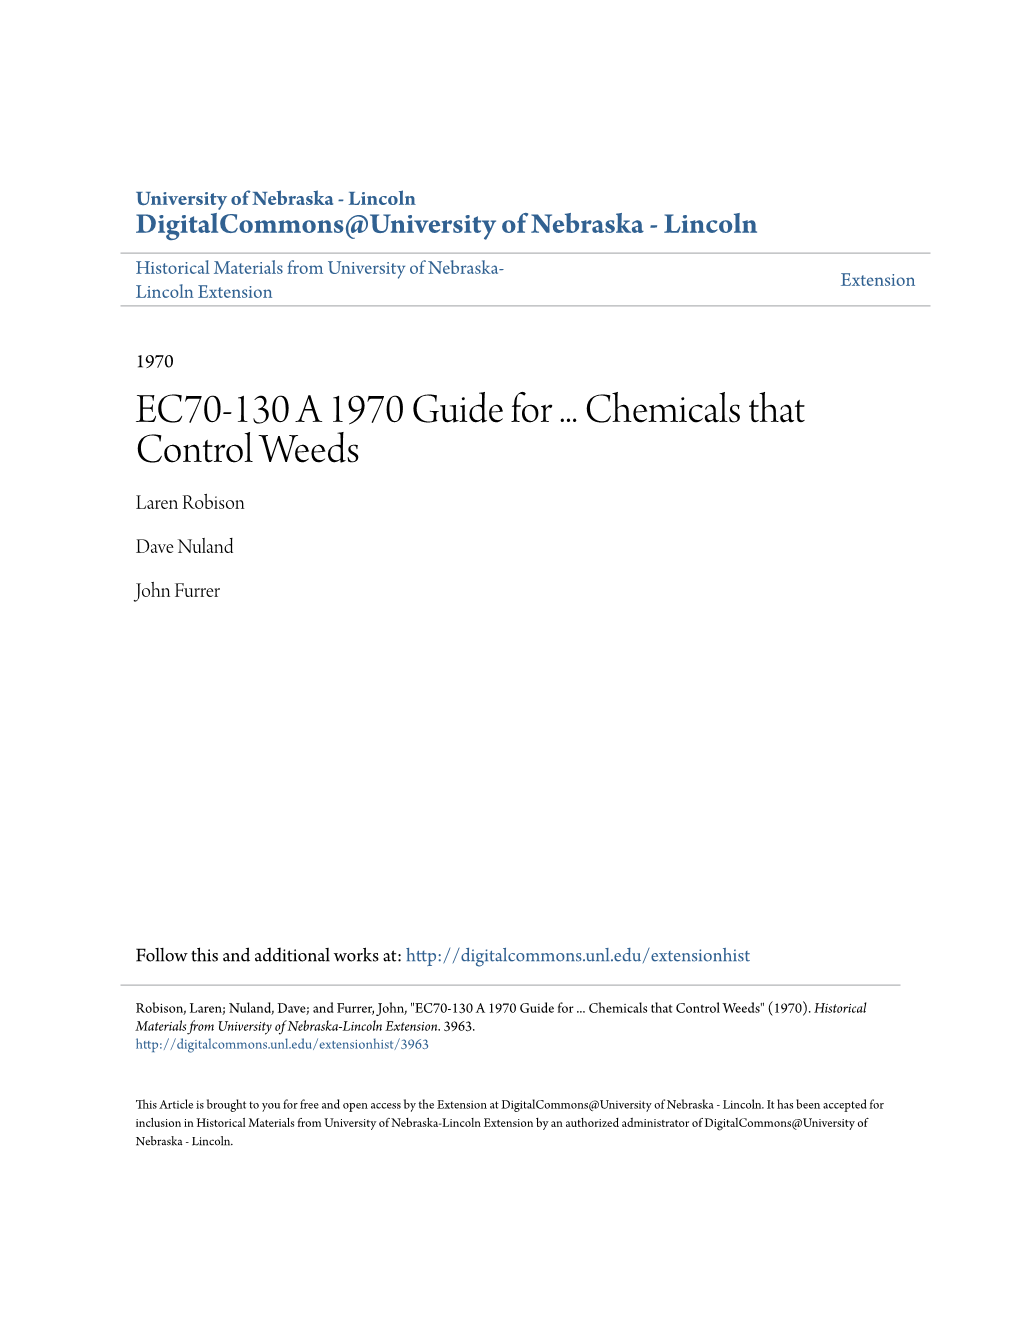 EC70-130 a 1970 Guide for ... Chemicals That Control Weeds Laren Robison